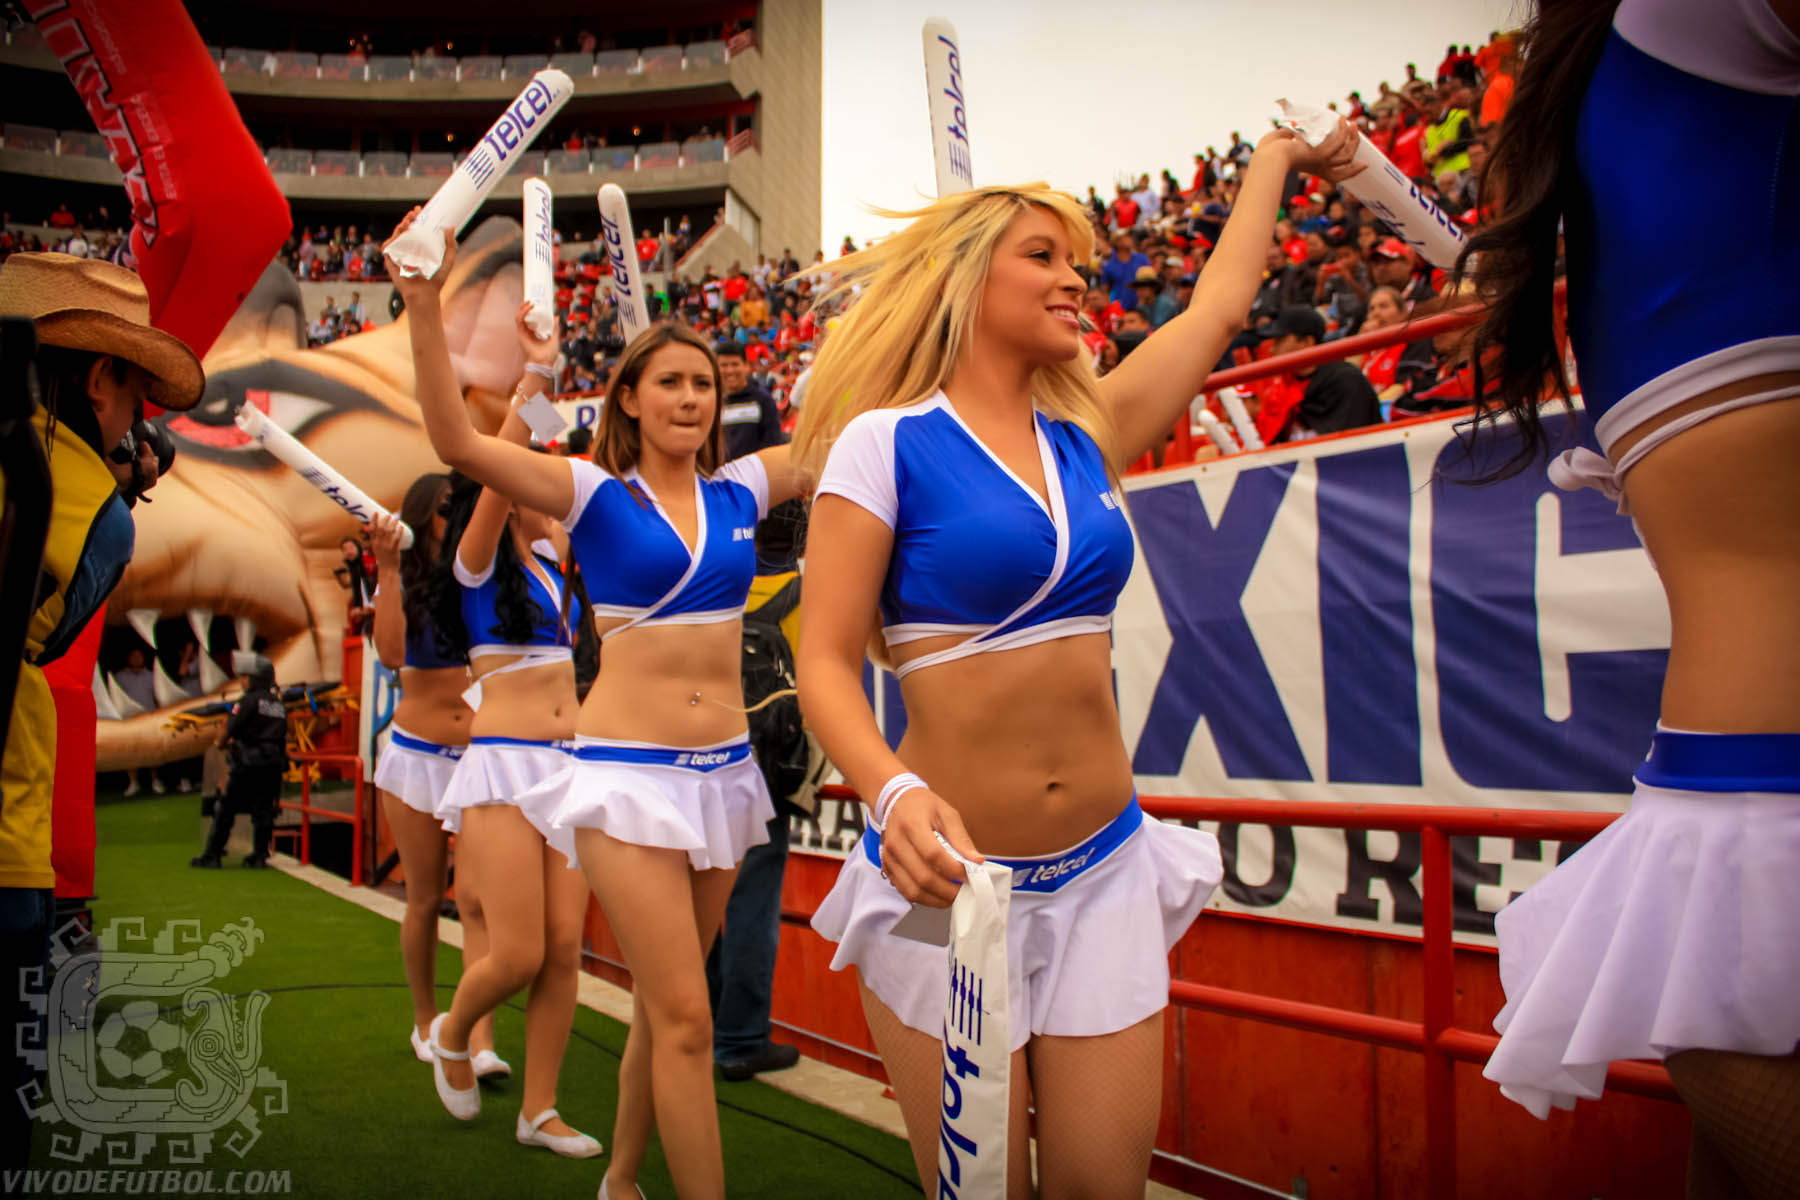 two cheerleaders at an event wearing blue and white outfits